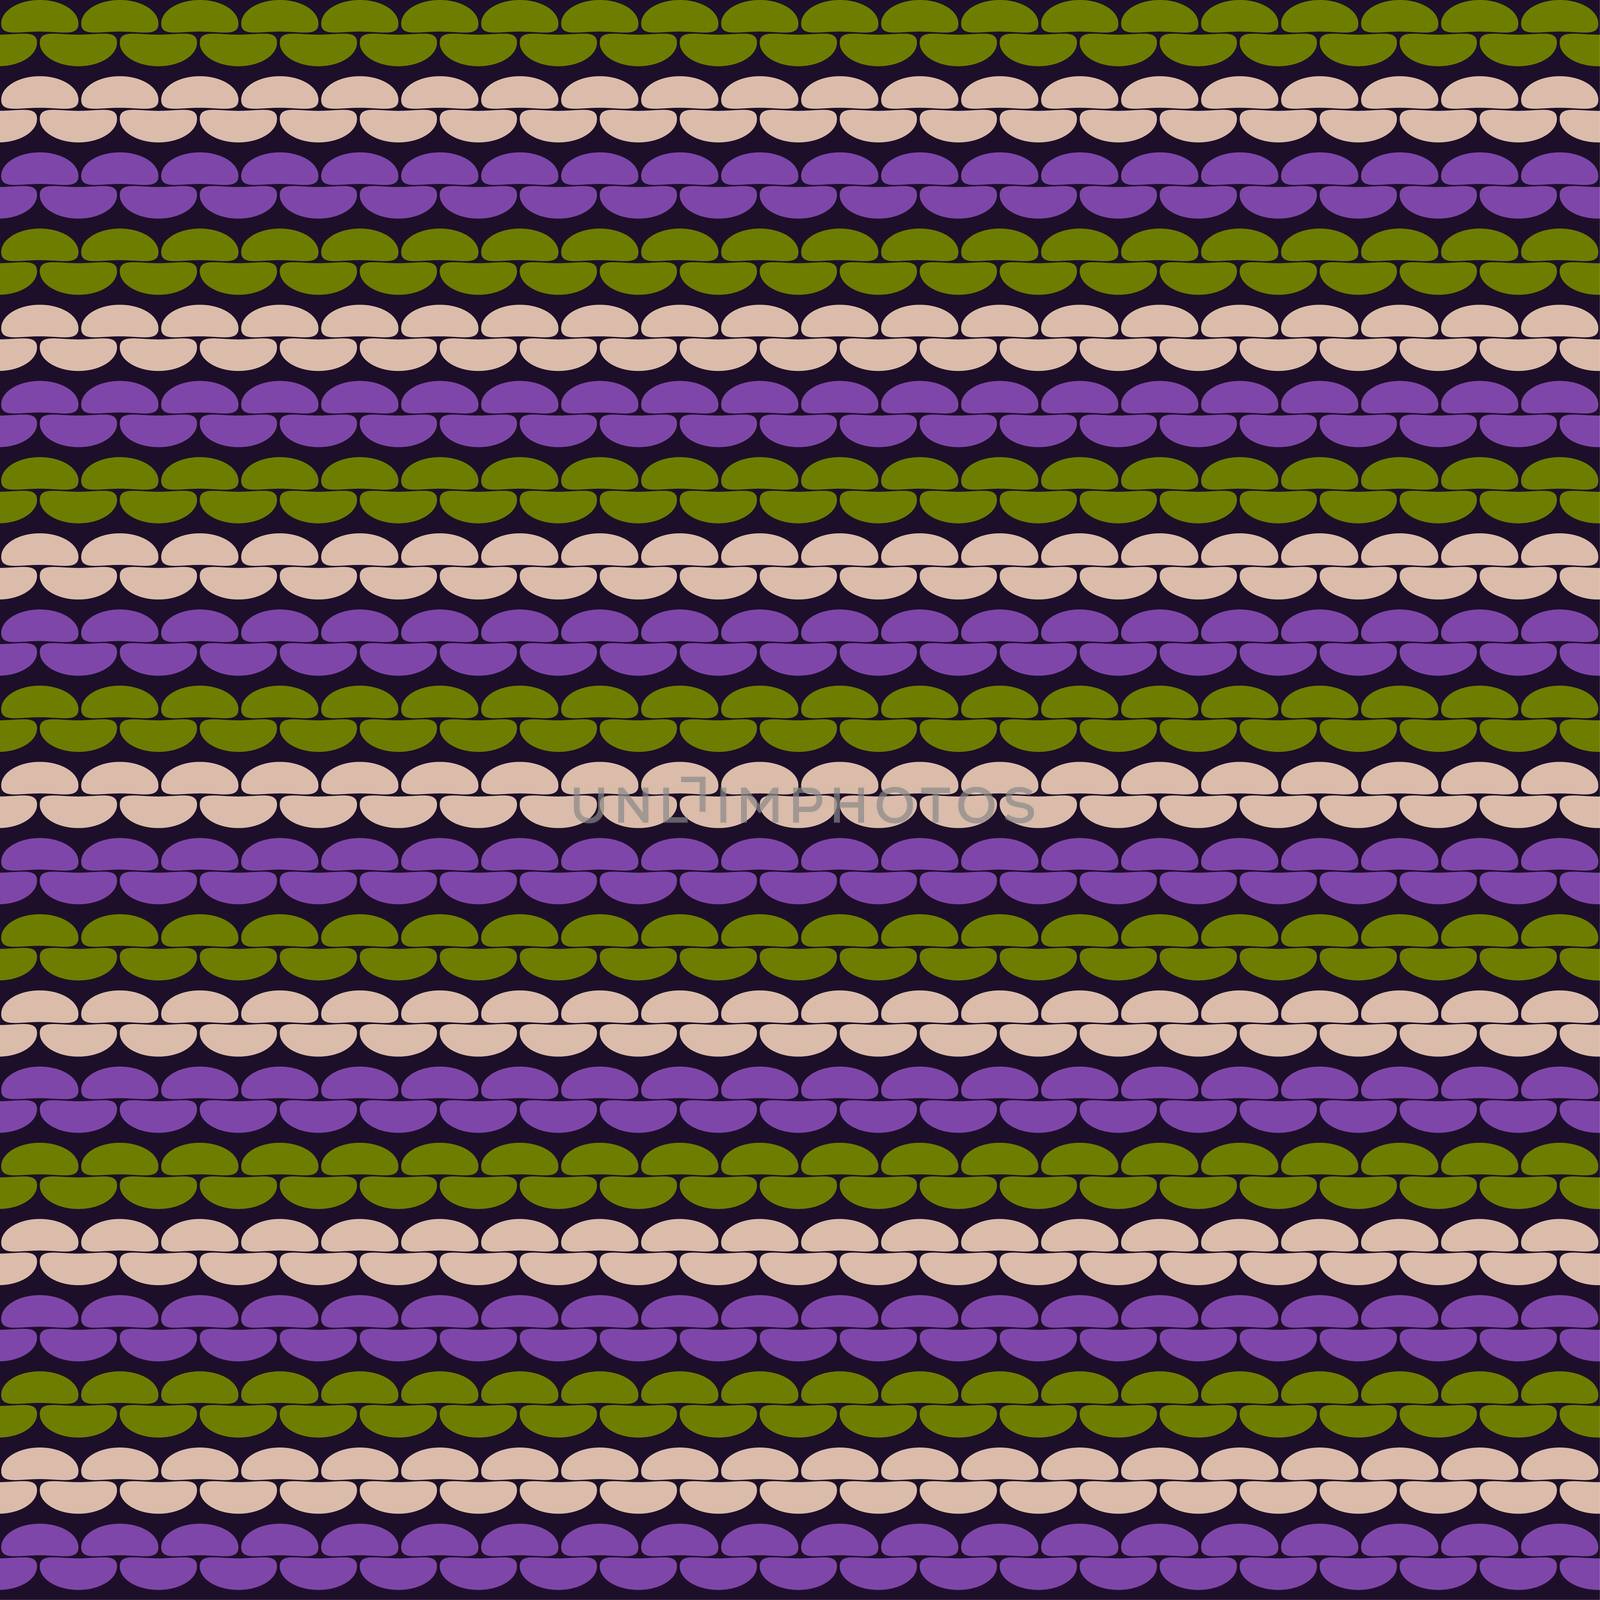 Seamless knitted background. Knitted realistic seamless pattern of purple and white color. Reverse side.